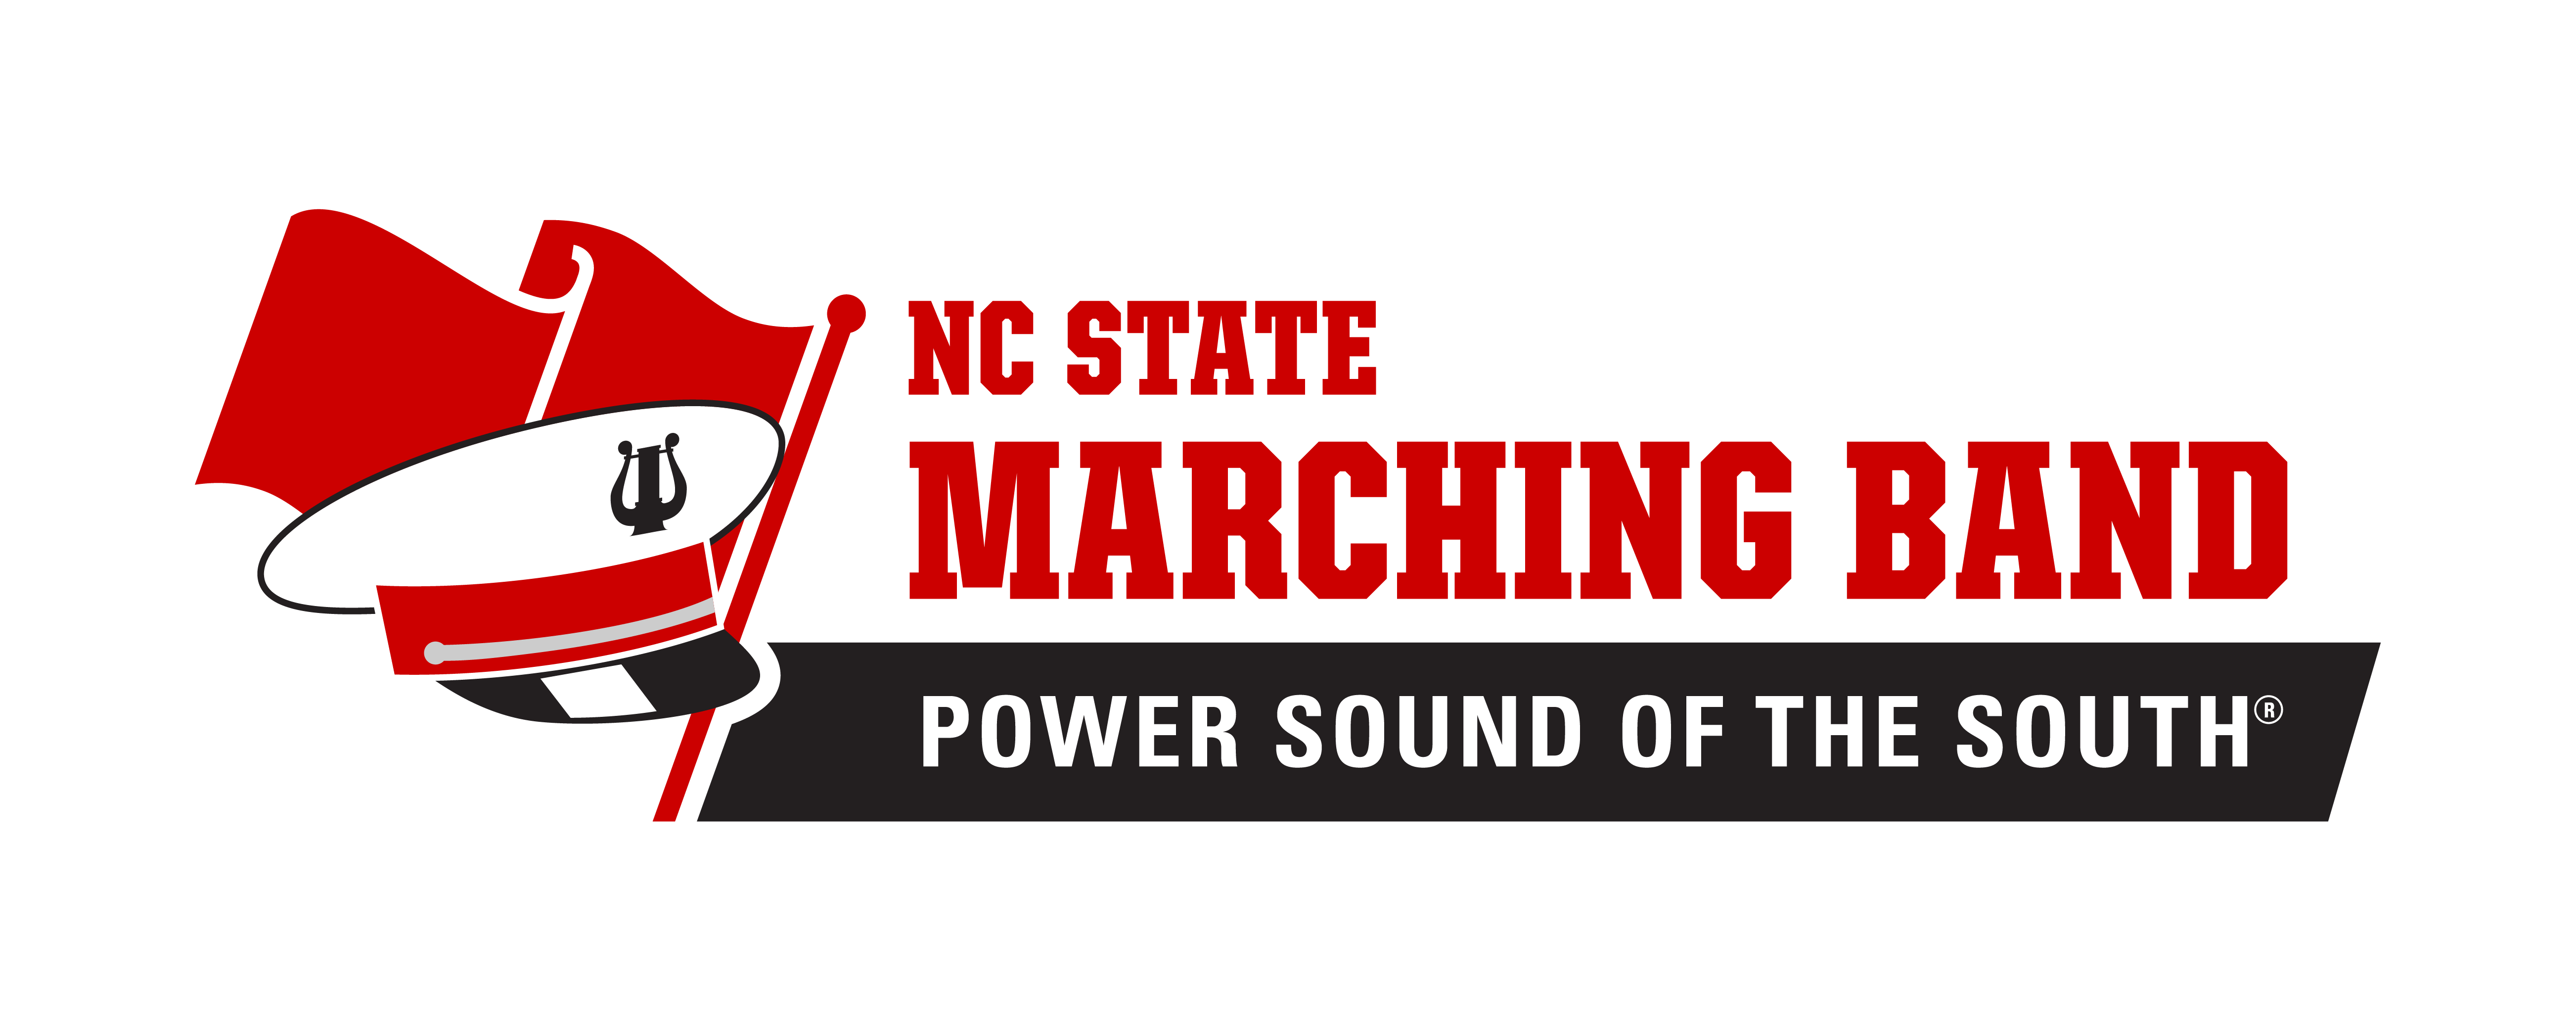 Logo for the Power Sound of the South featuring uniform cap and color guard flag.